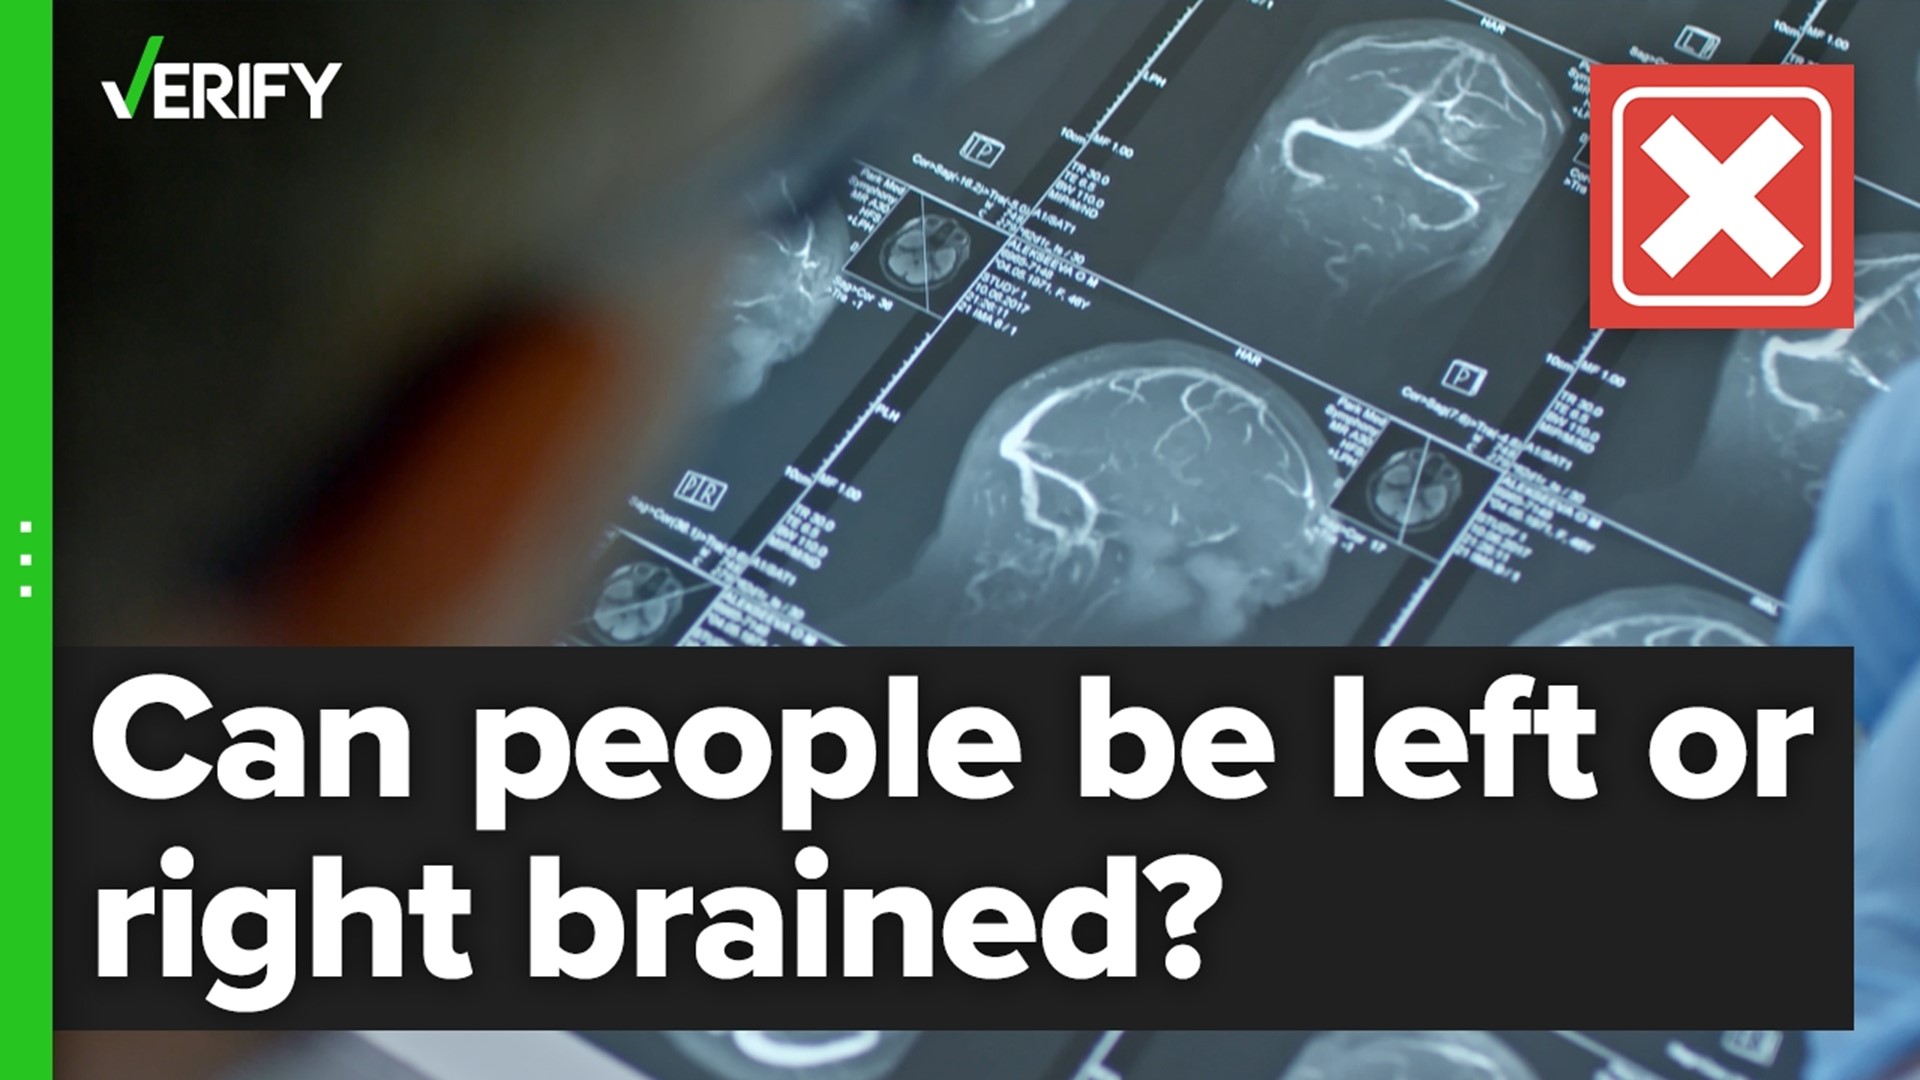 Are people either left-brained or right-brained? The VERIFY team confirms this is false.